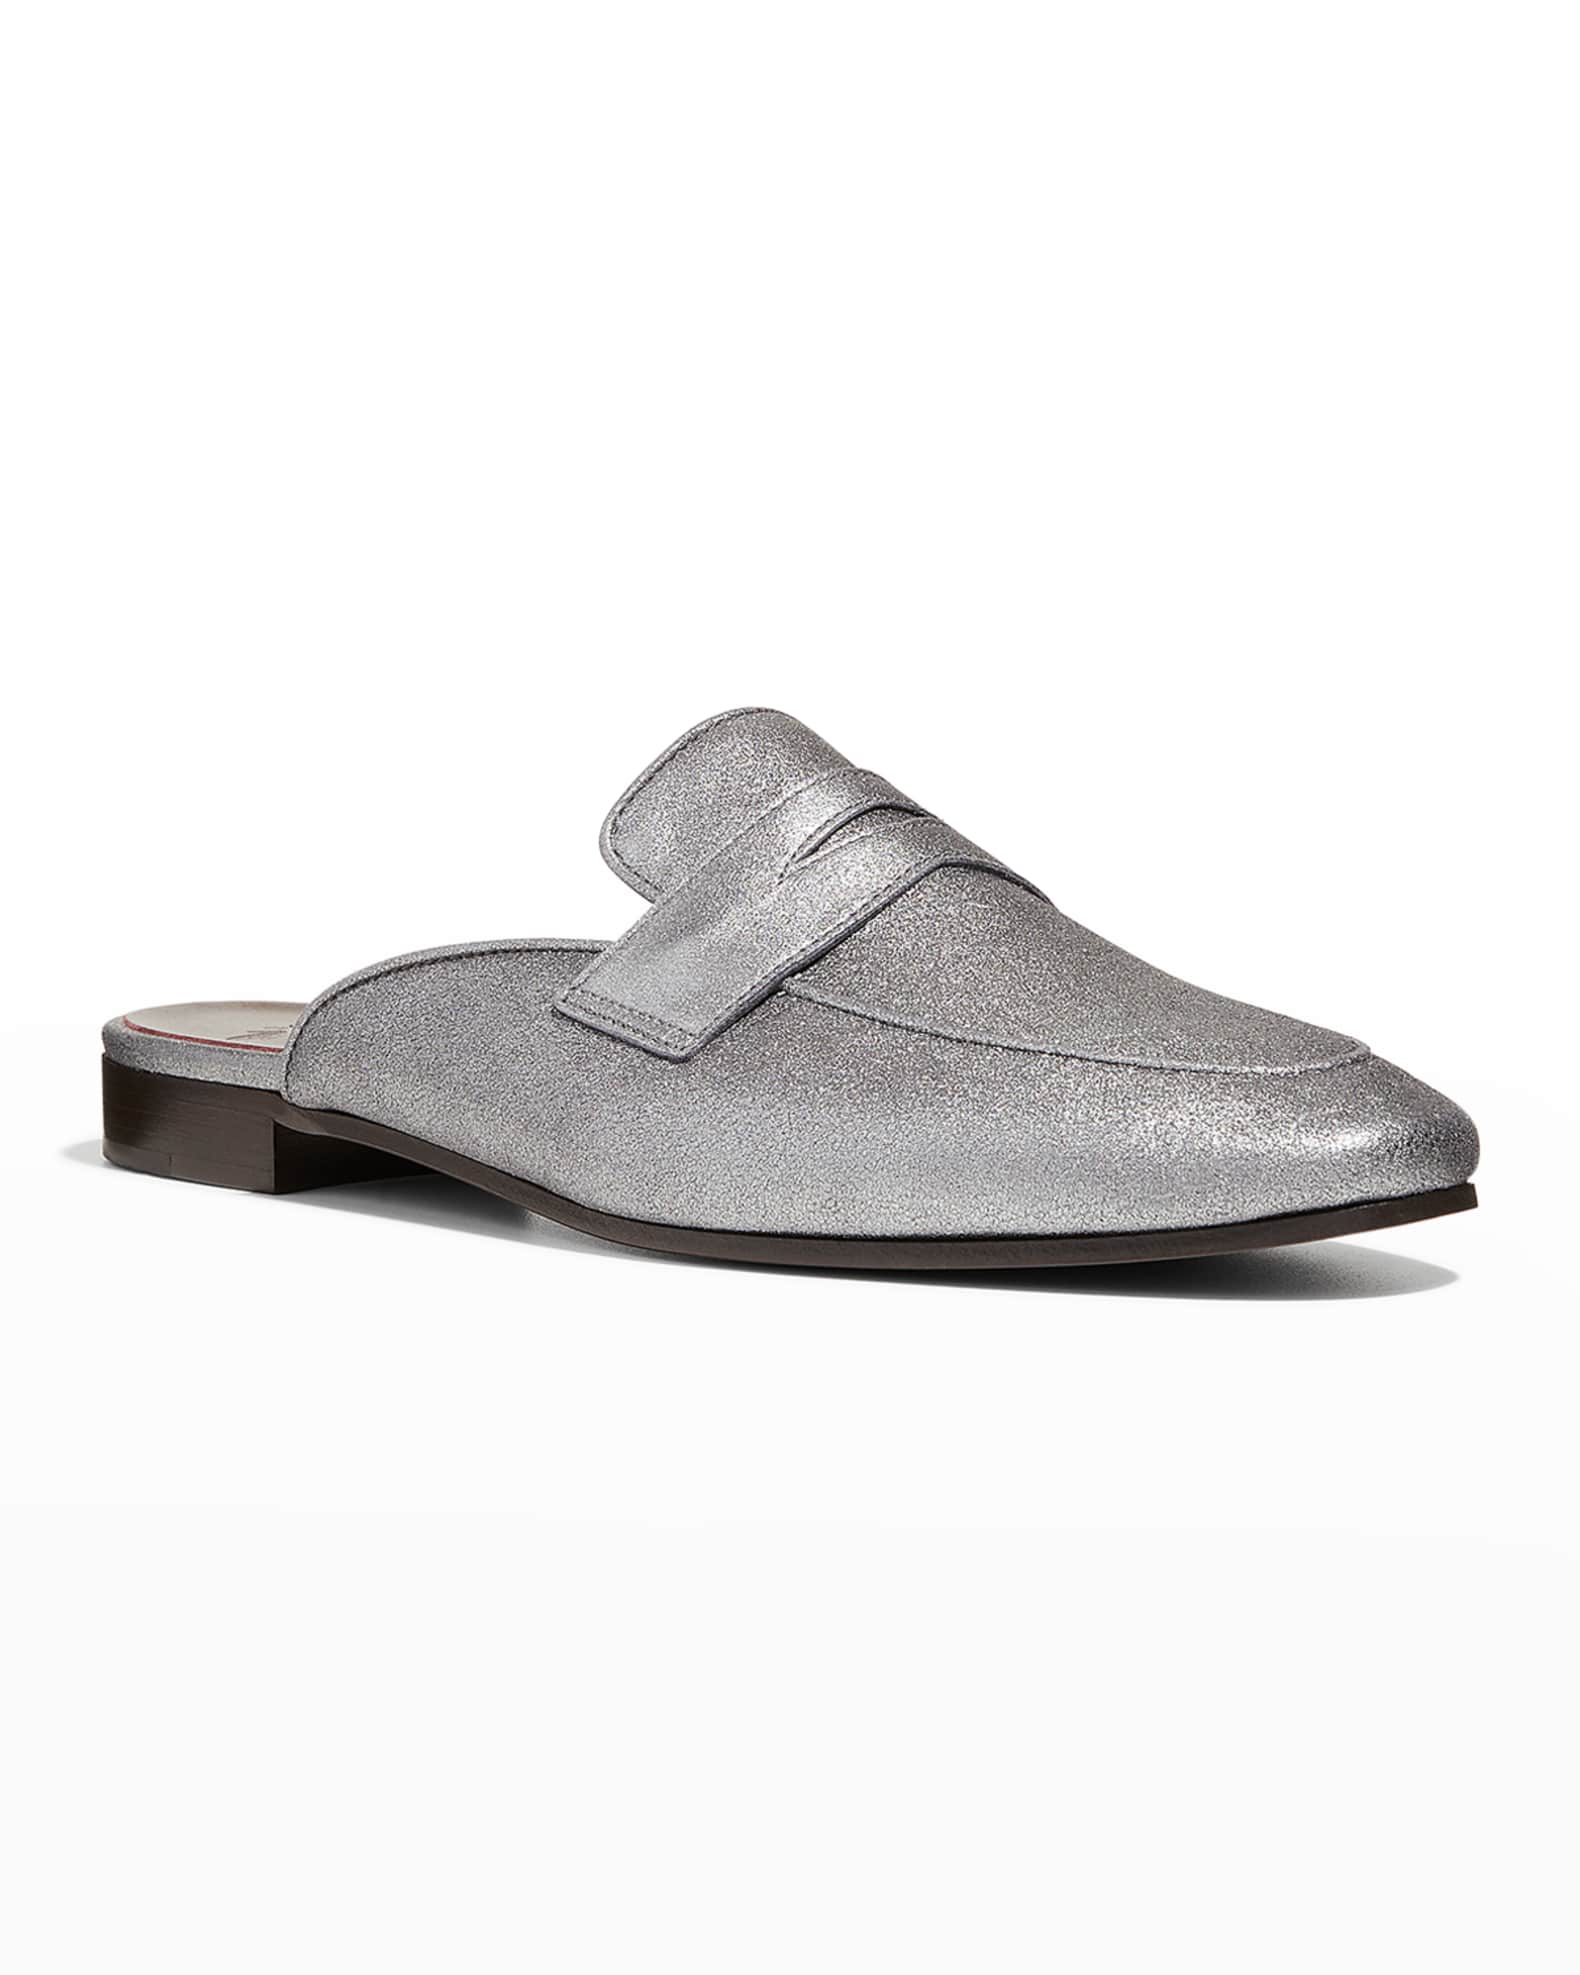 Bougeotte Metallic Leather Penny Loafer Mules | Neiman Marcus